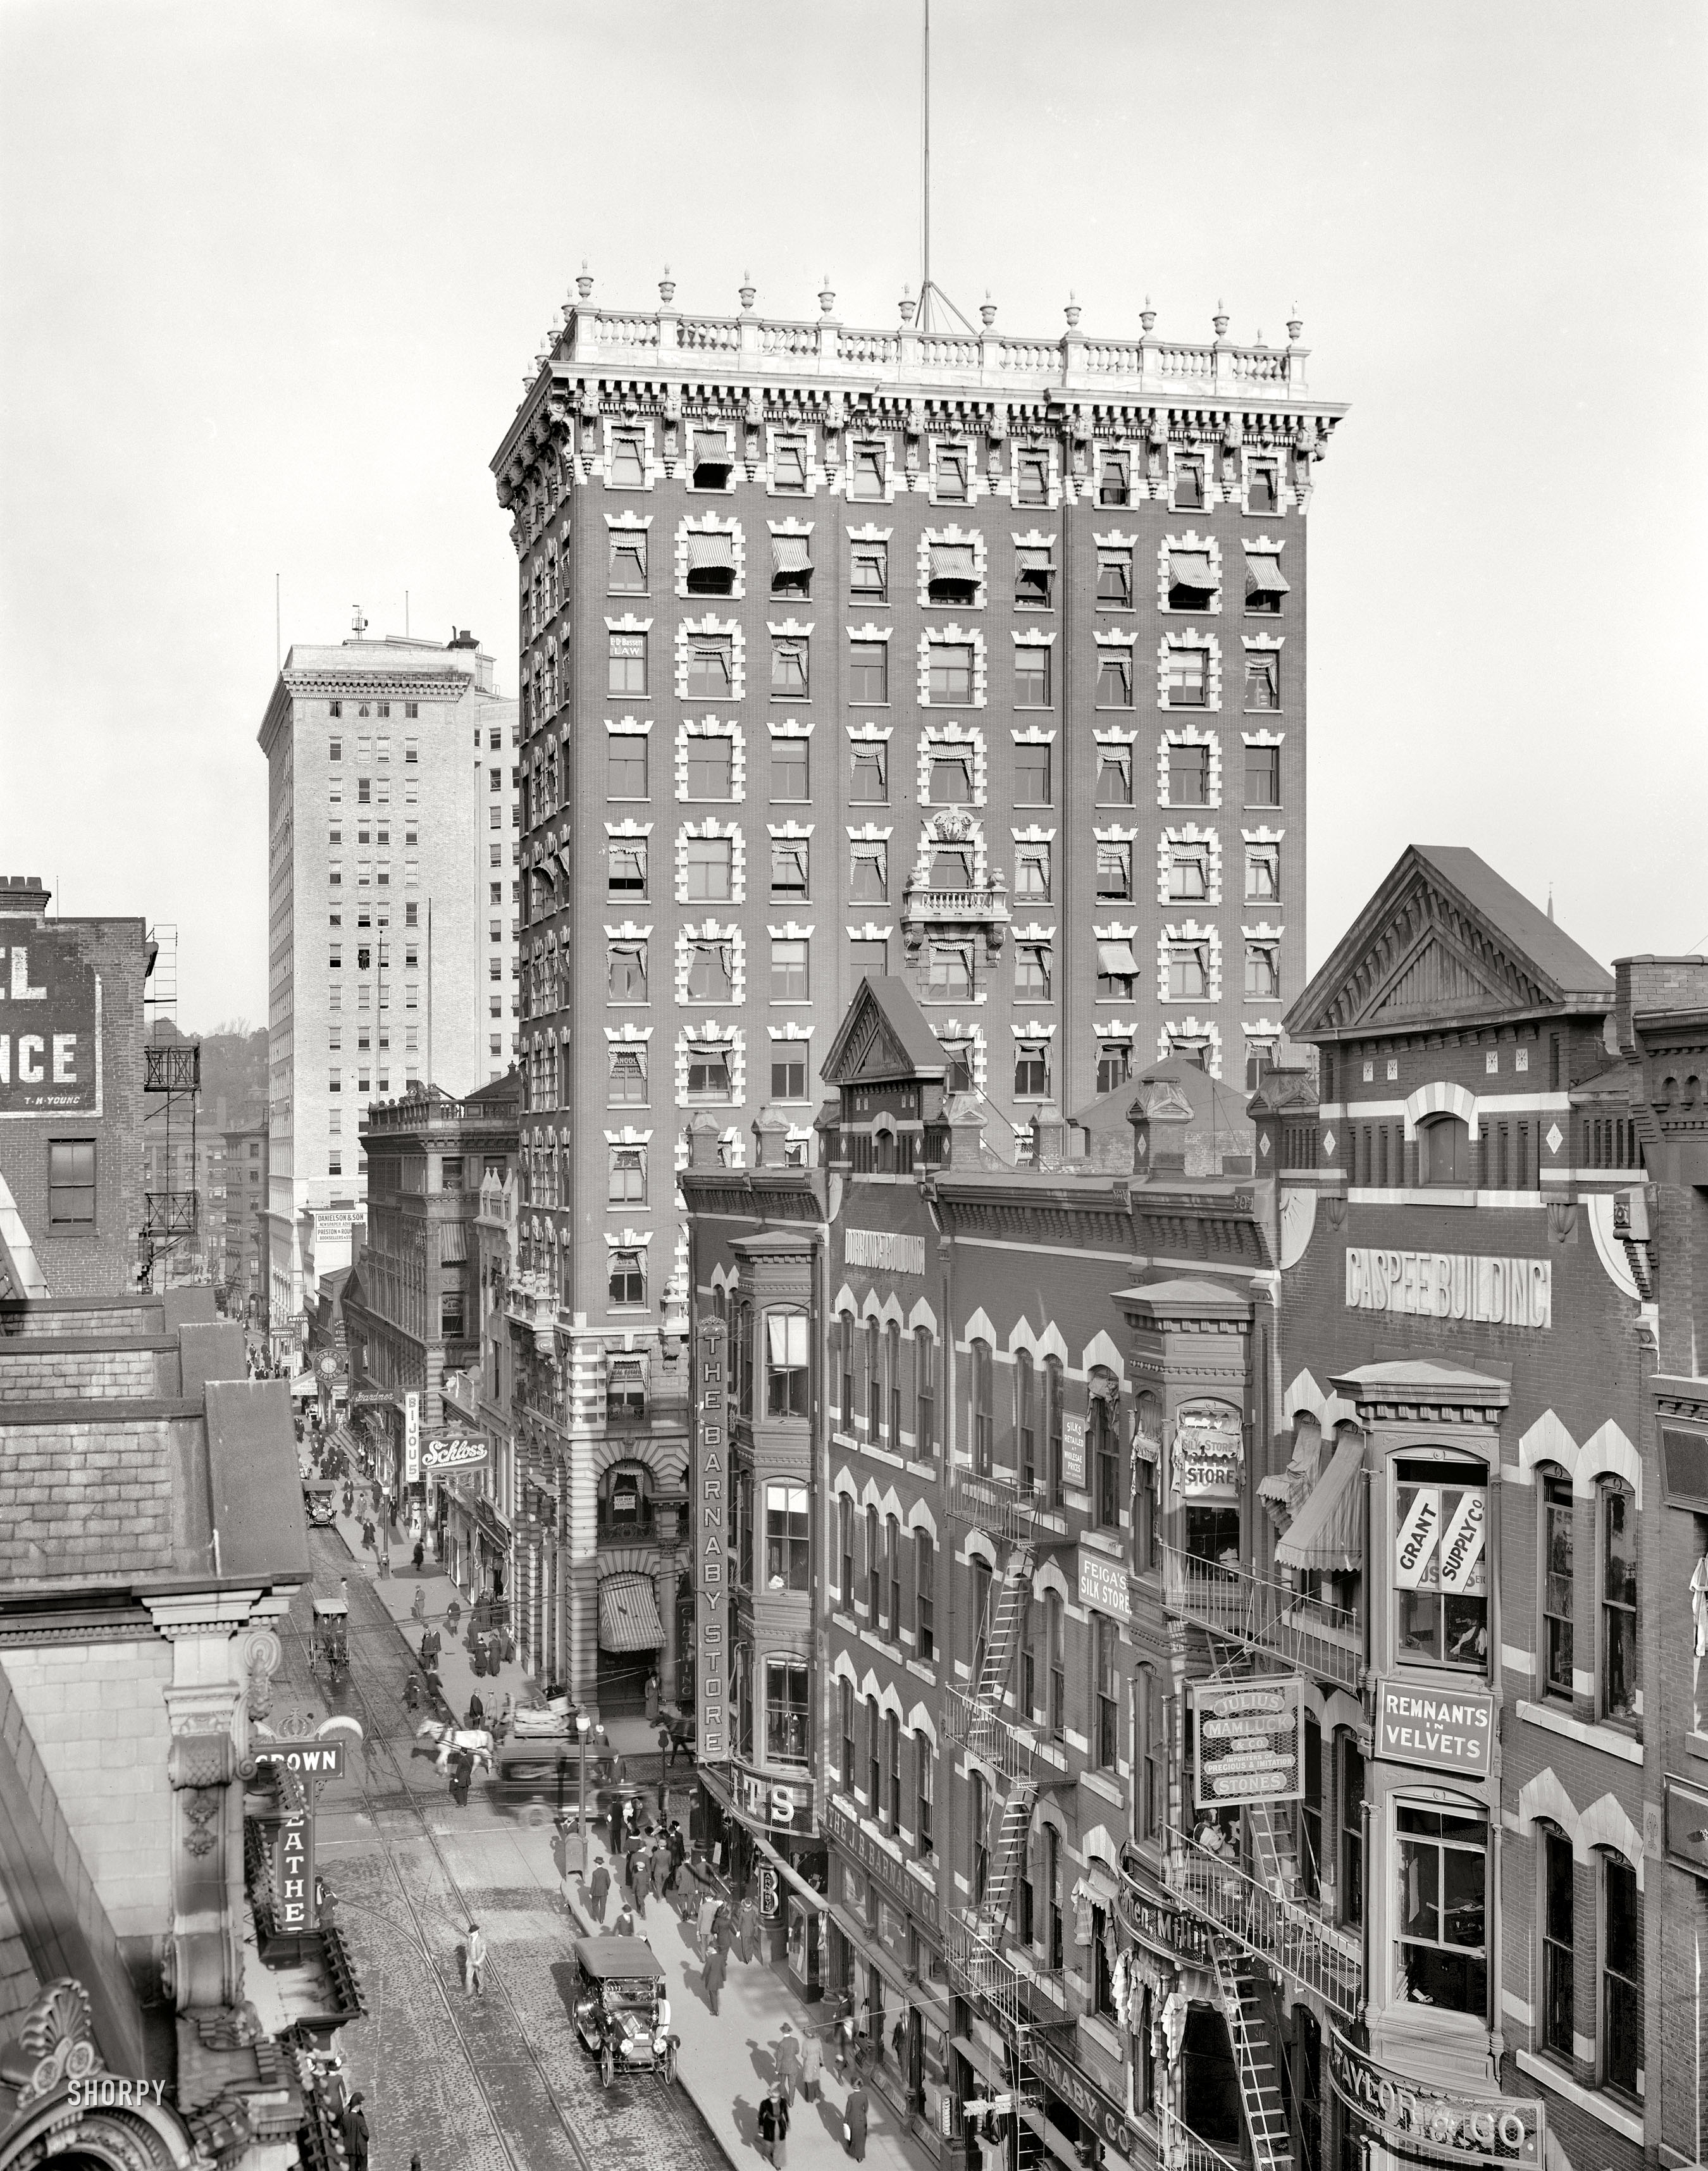 Providence, Rhode Island, circa 1910. "Westminster Street." An interesting and varied cross-section of commerce with the Union Trust building as the centerpiece. 8x10 inch glass negative, Detroit Publishing Co. View full size.